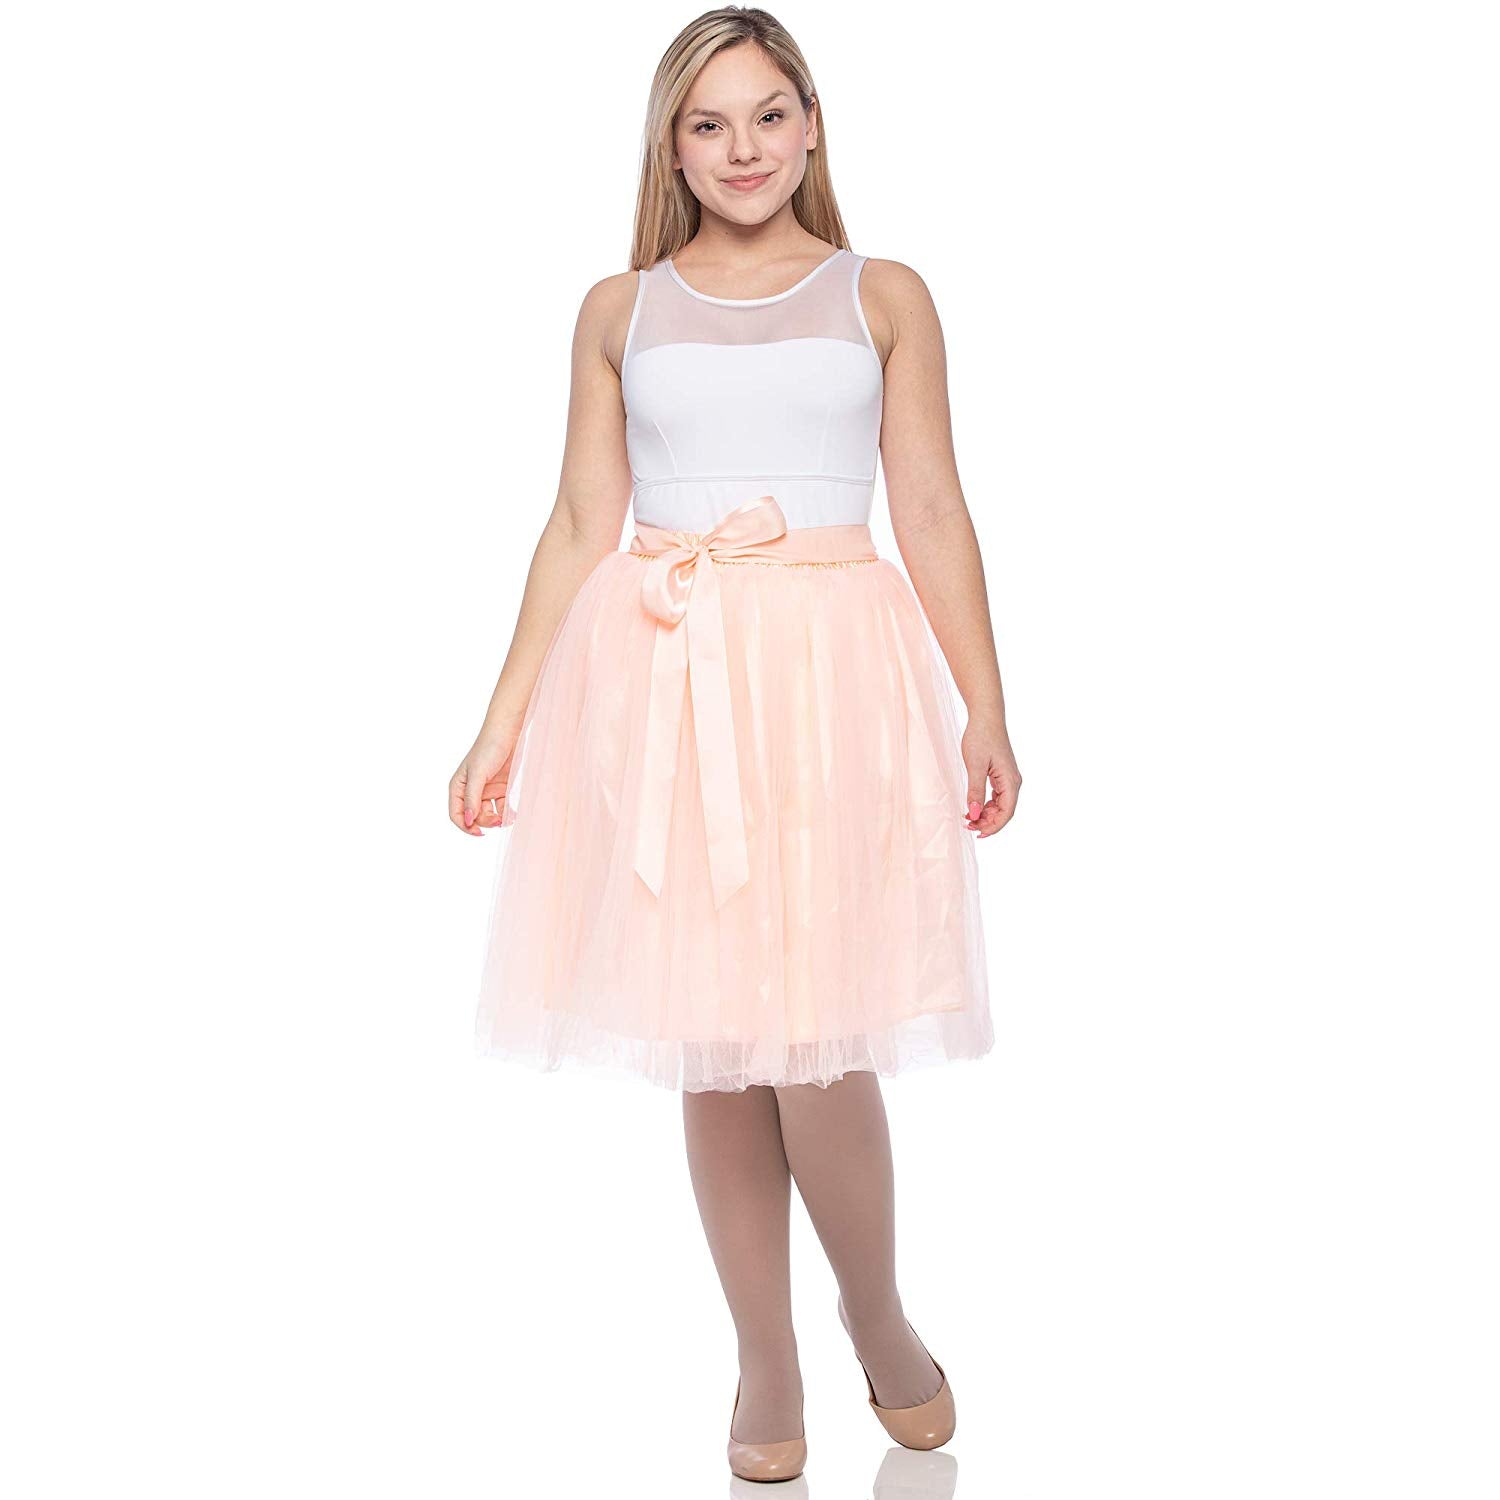 Adults & Girls A-line Knee Length Tutu Tulle Skirt - Regular and Plus Size in Pink